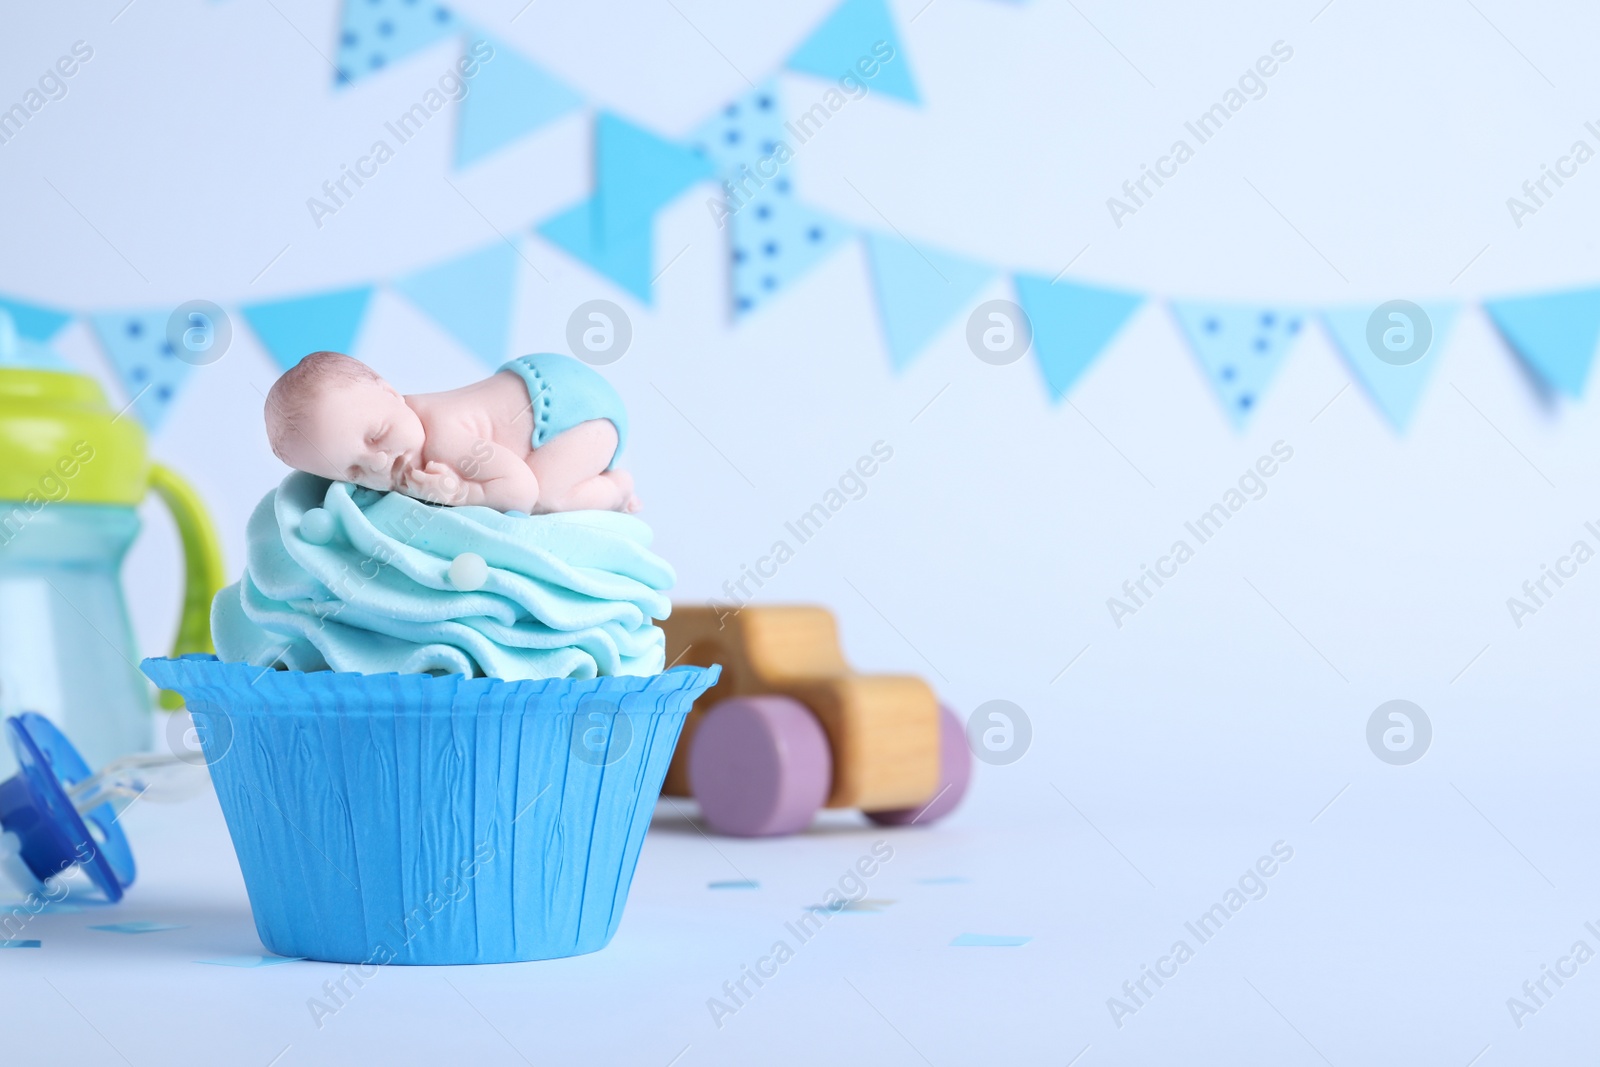 Photo of Beautifully decorated baby shower cupcake with cream and boy topper on light background. Space for text